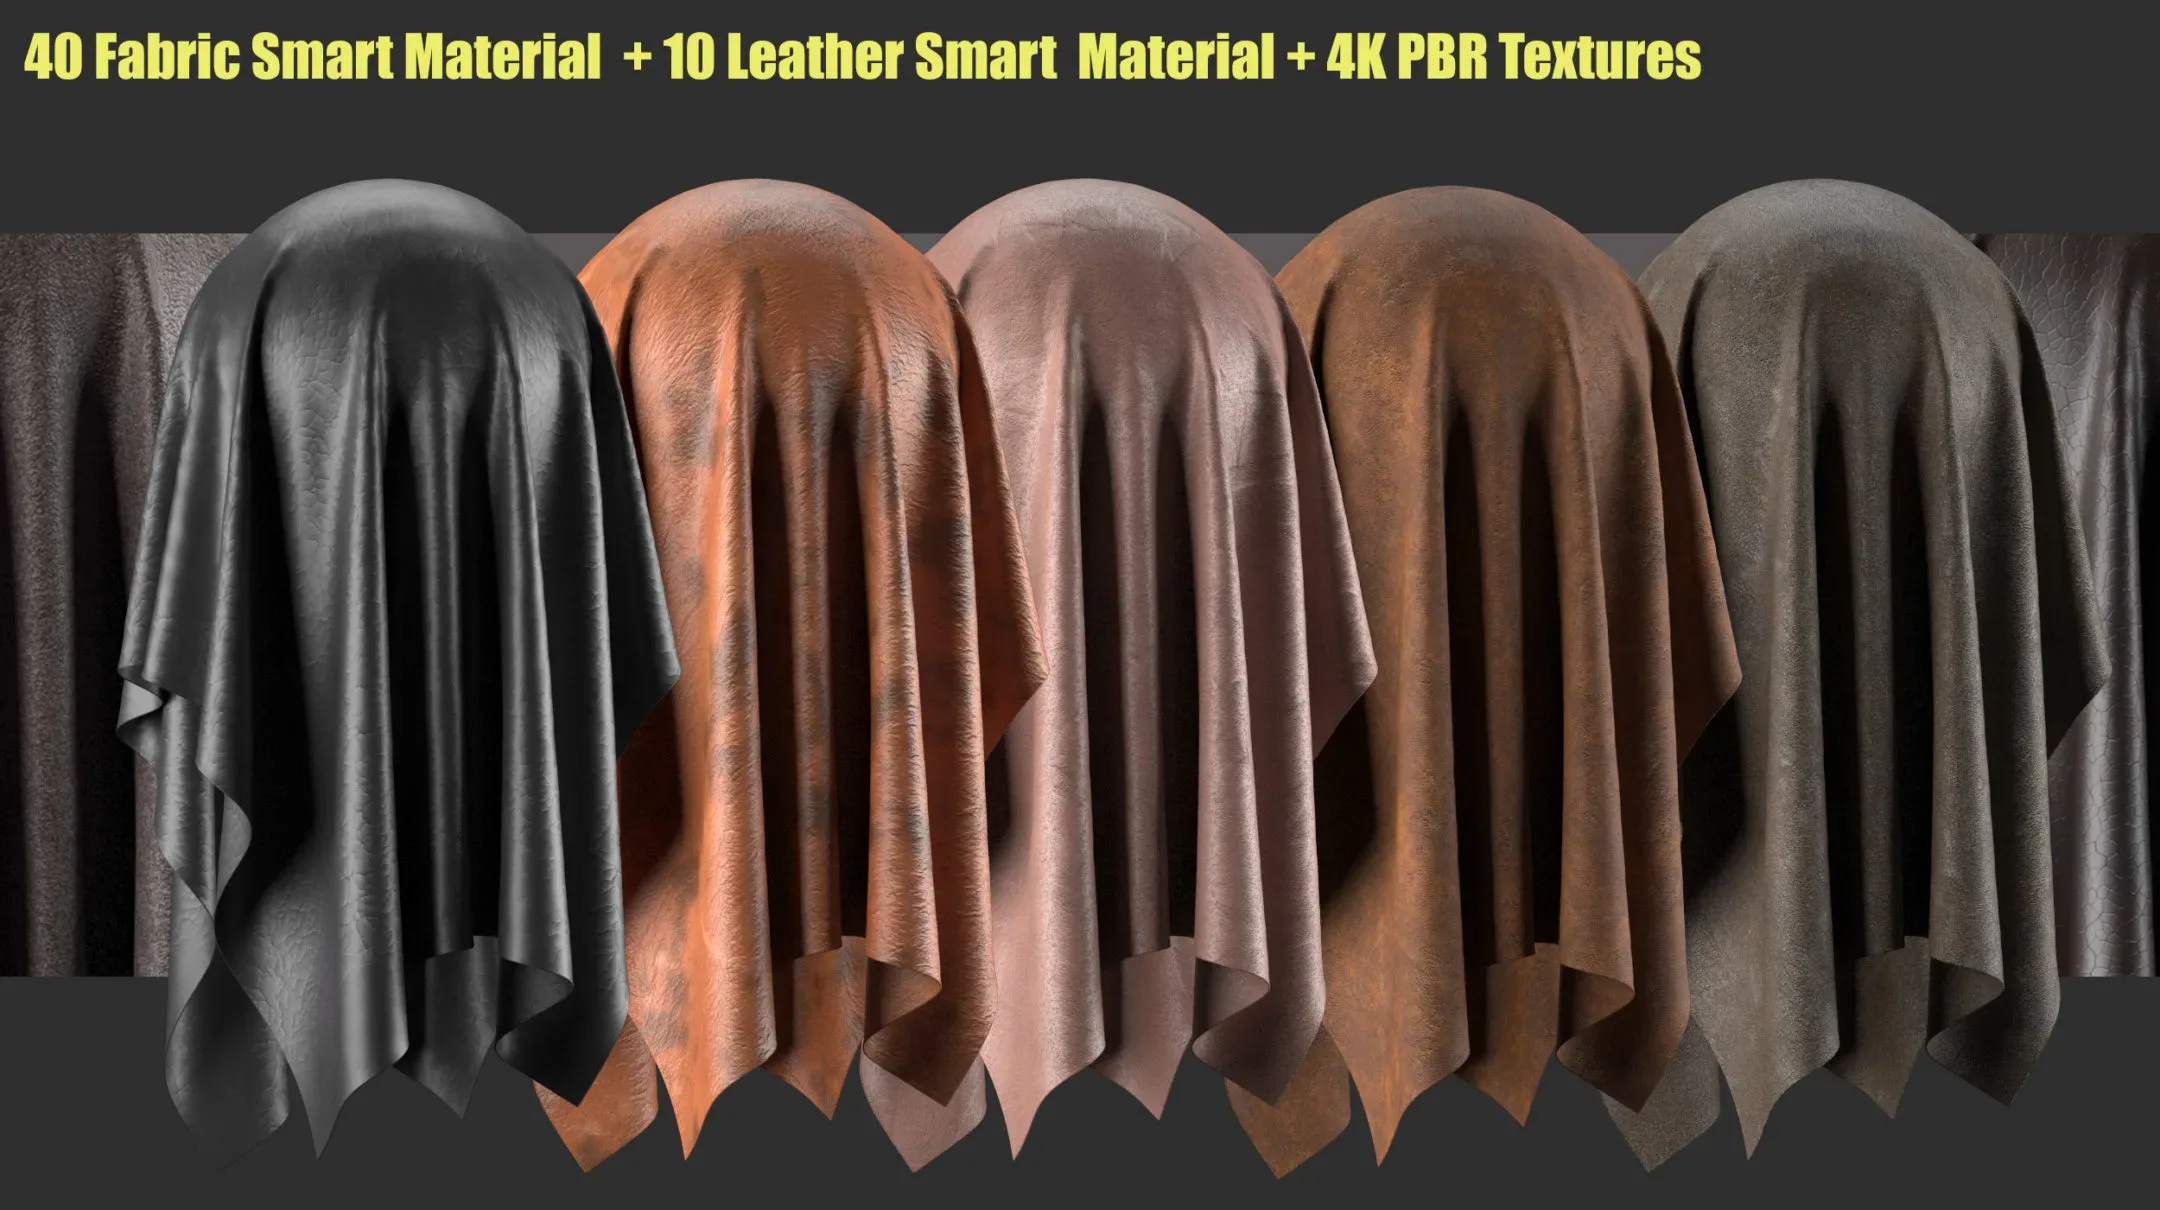 40 Fabric Smart Material+10 Leather Smart Material+4K PBR Textures